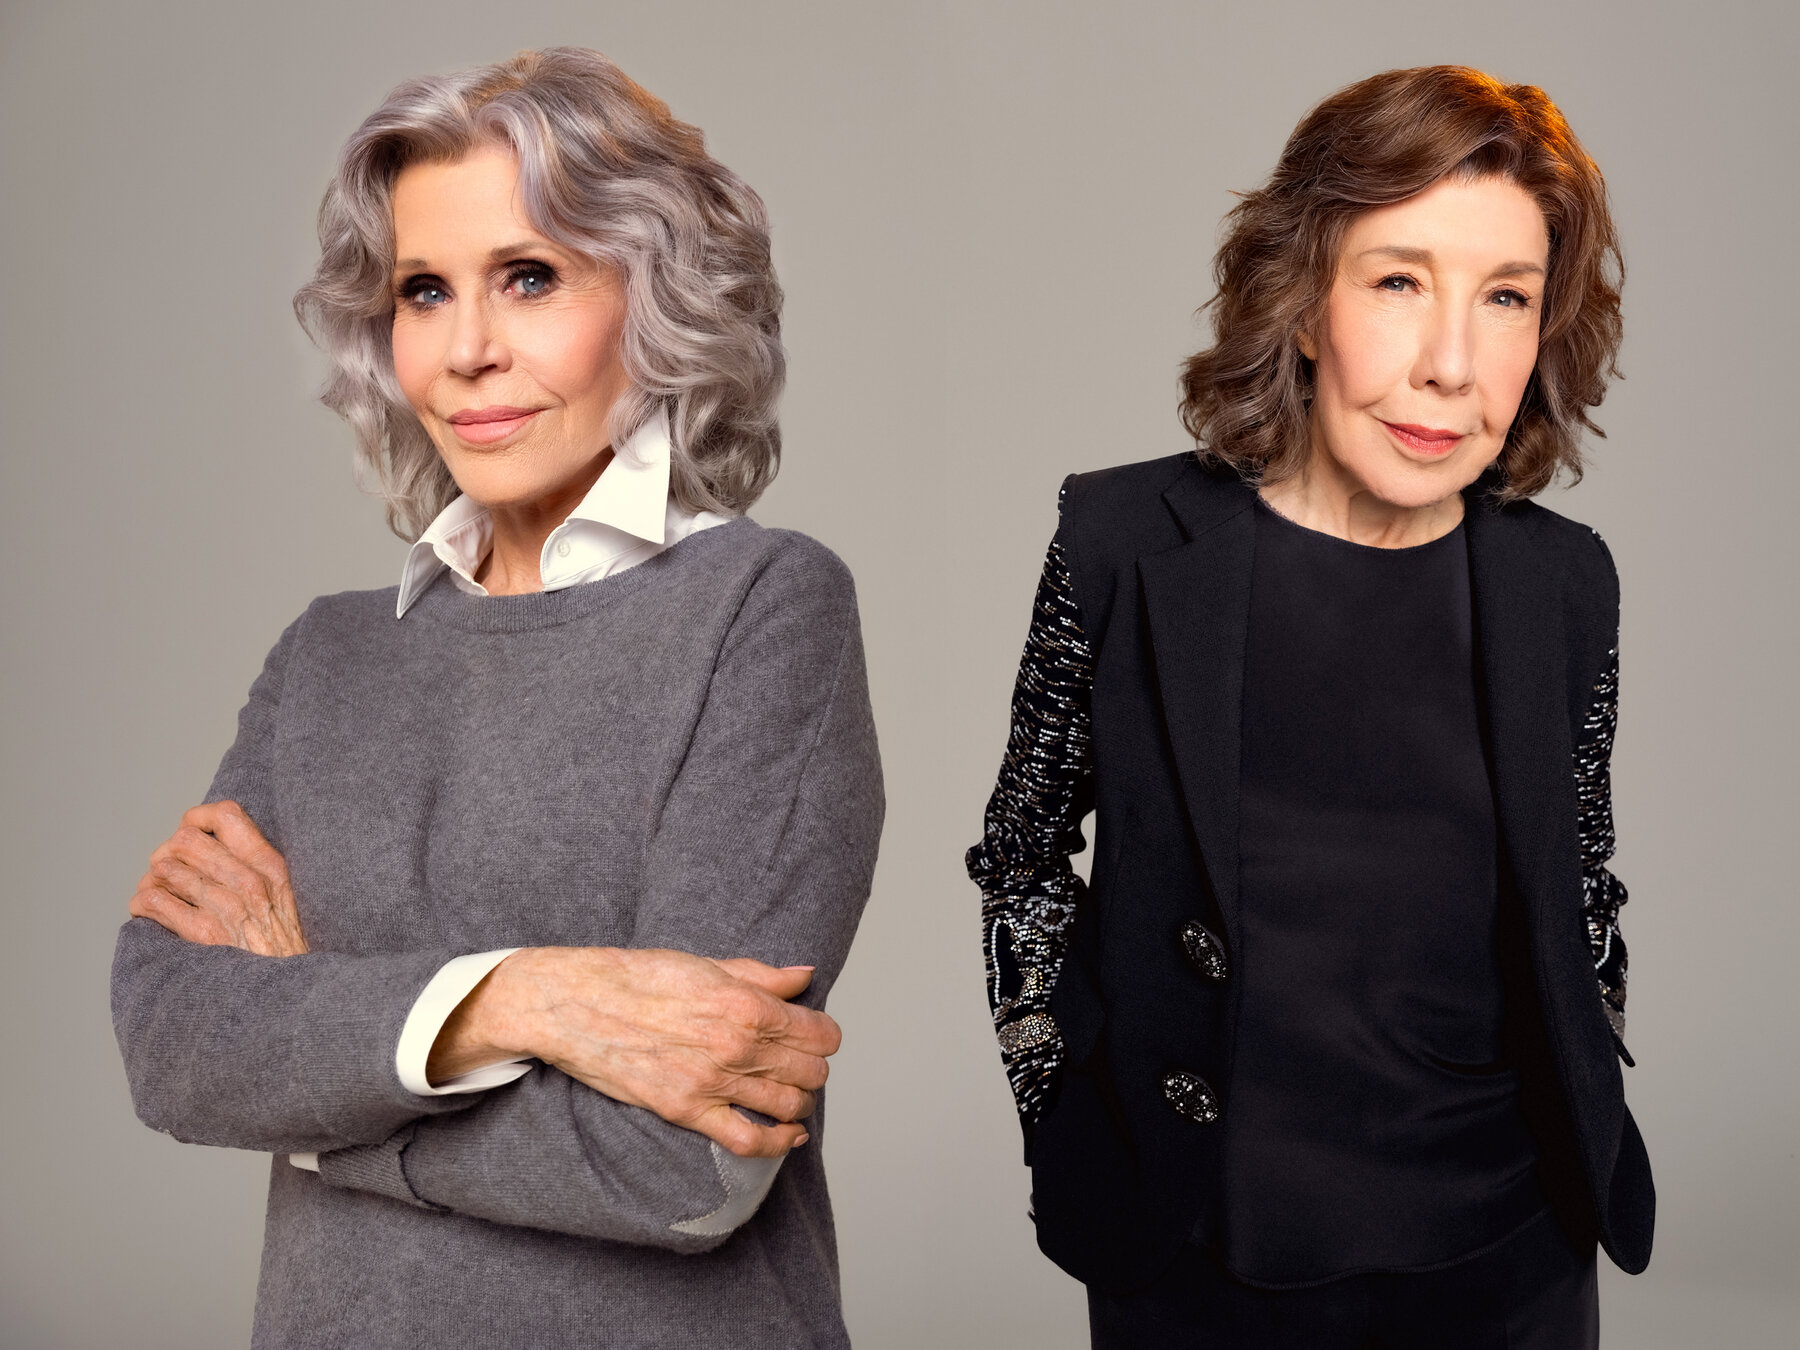 Jane Fonda and Lily Tomlin pose for a portrait. Fonda has her arms crossed and Tomlin has her hands in her pockets